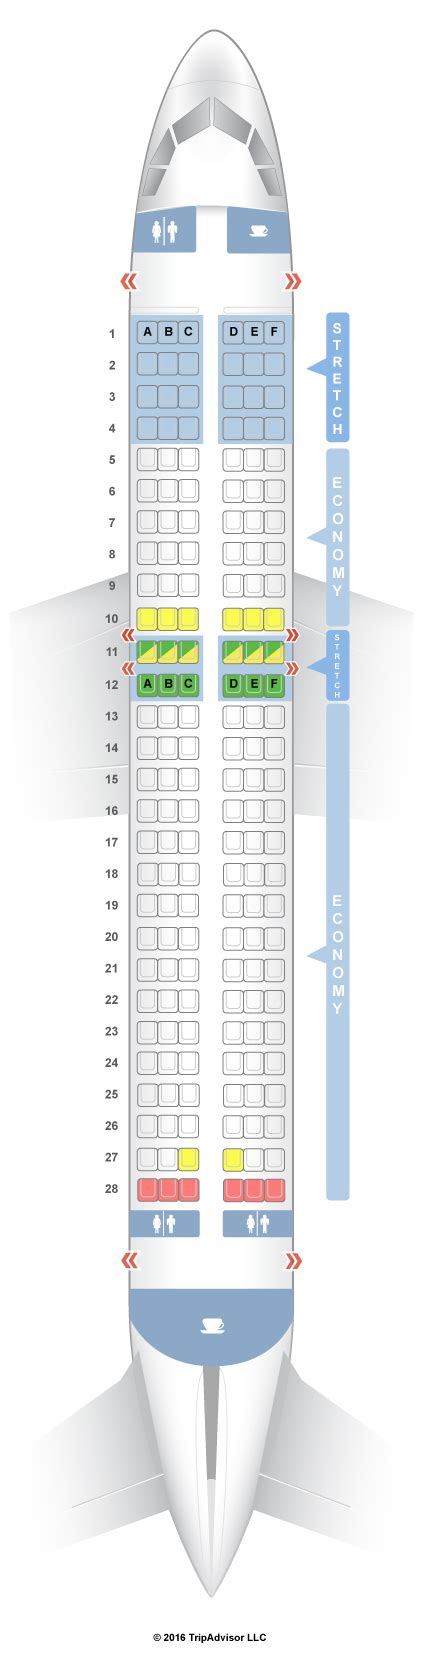 AIRCRAFT OVERVIEW. The Airbus A320-200 V.3 is an aircraft produced by Airbus for Air Canada and has the following seat configuration: 0-70-0-0. Business. Seats 70. Pitch 44". Width 20". Recline 11". Air Canada's business class on the Airbus A320-200 V.3 redefines luxury travel..